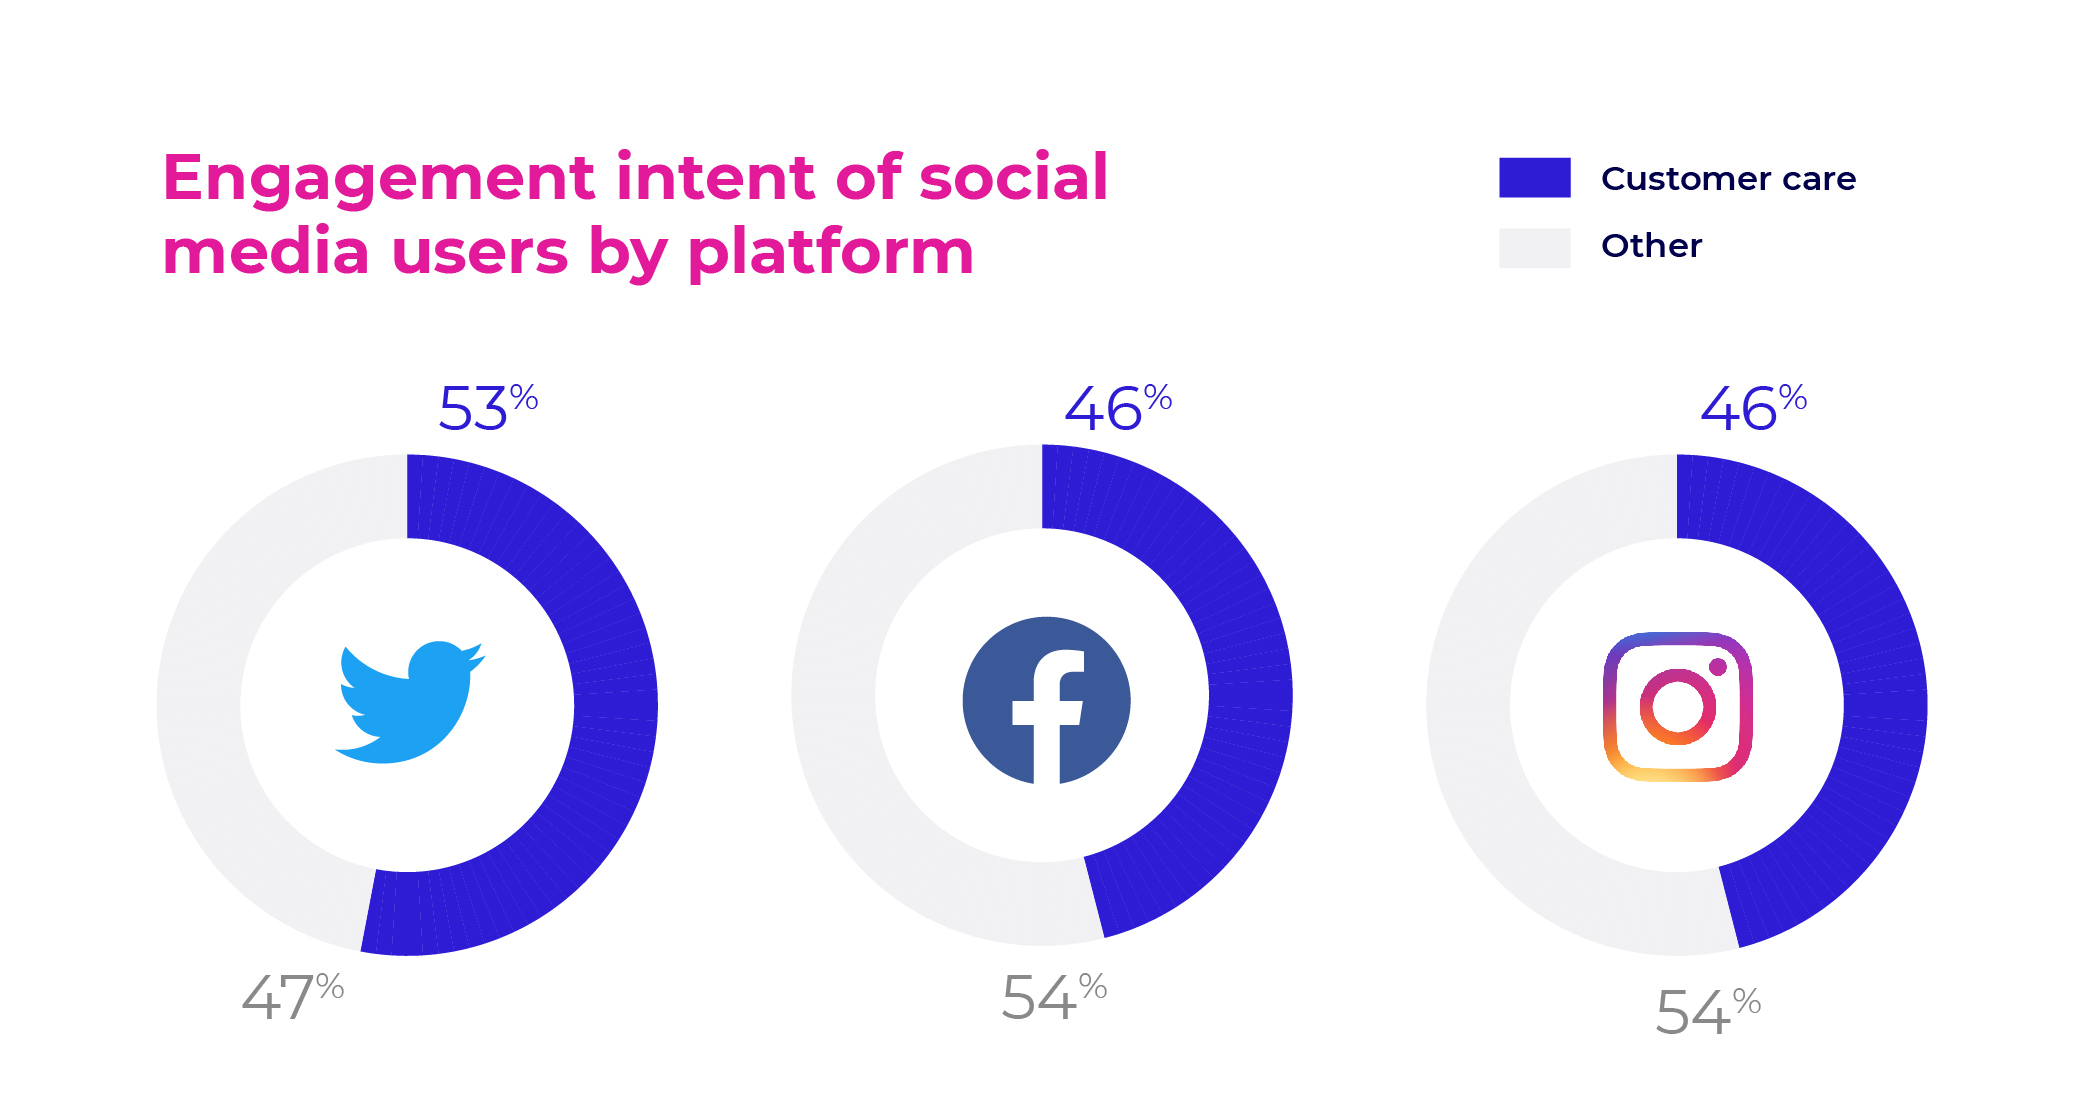 Engagement intent of social media users by platform